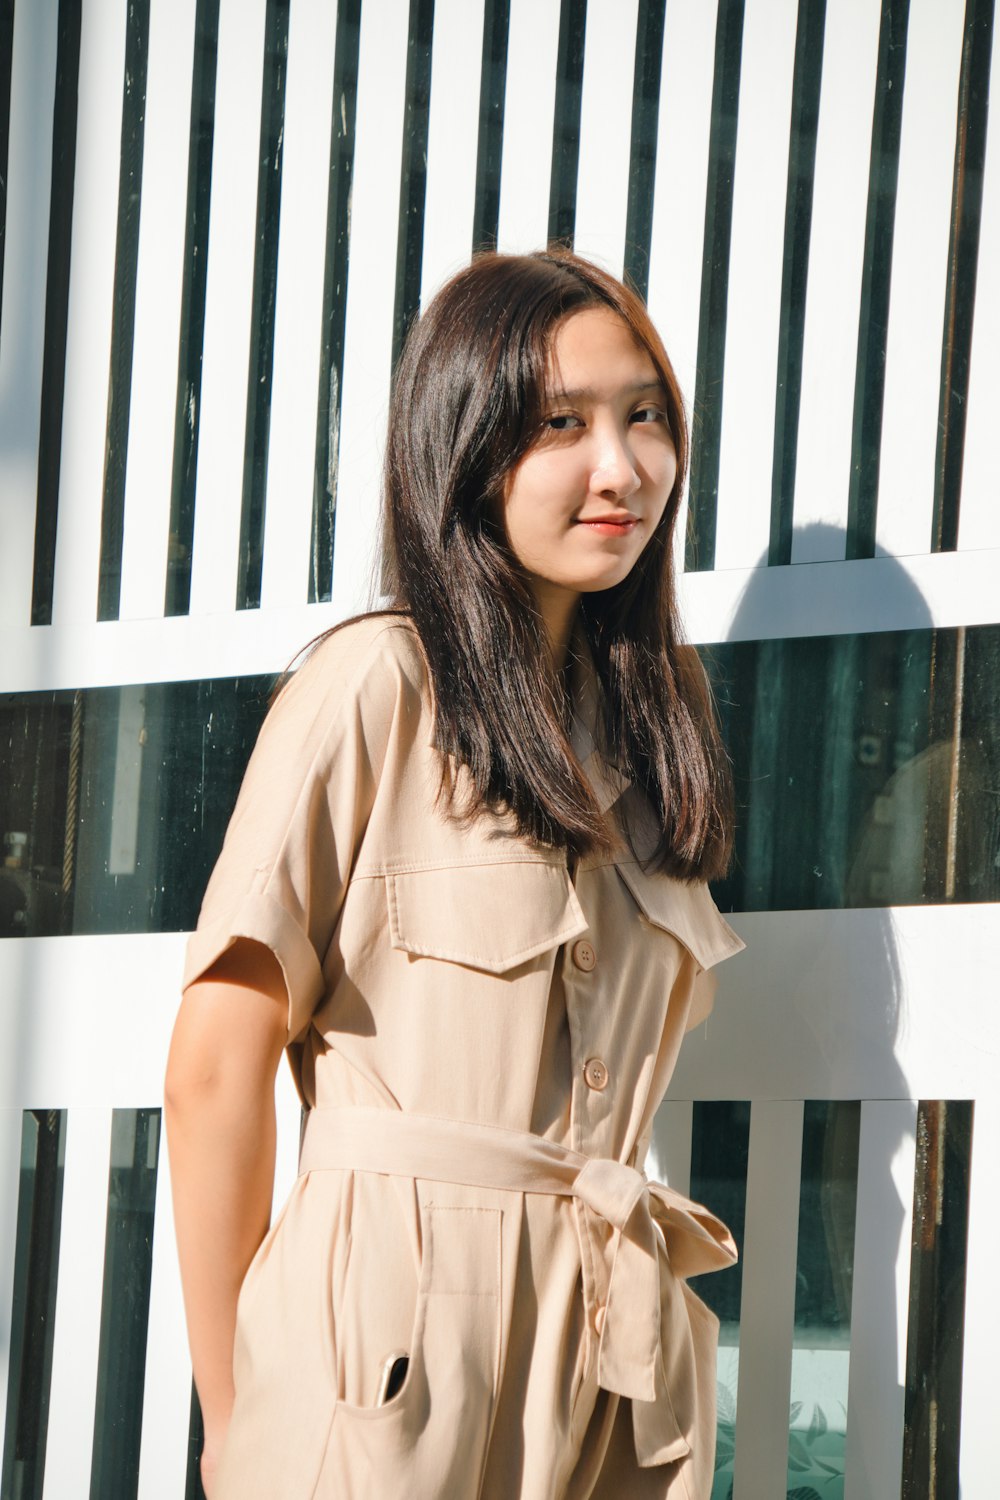 woman in brown dress standing near white wooden fence